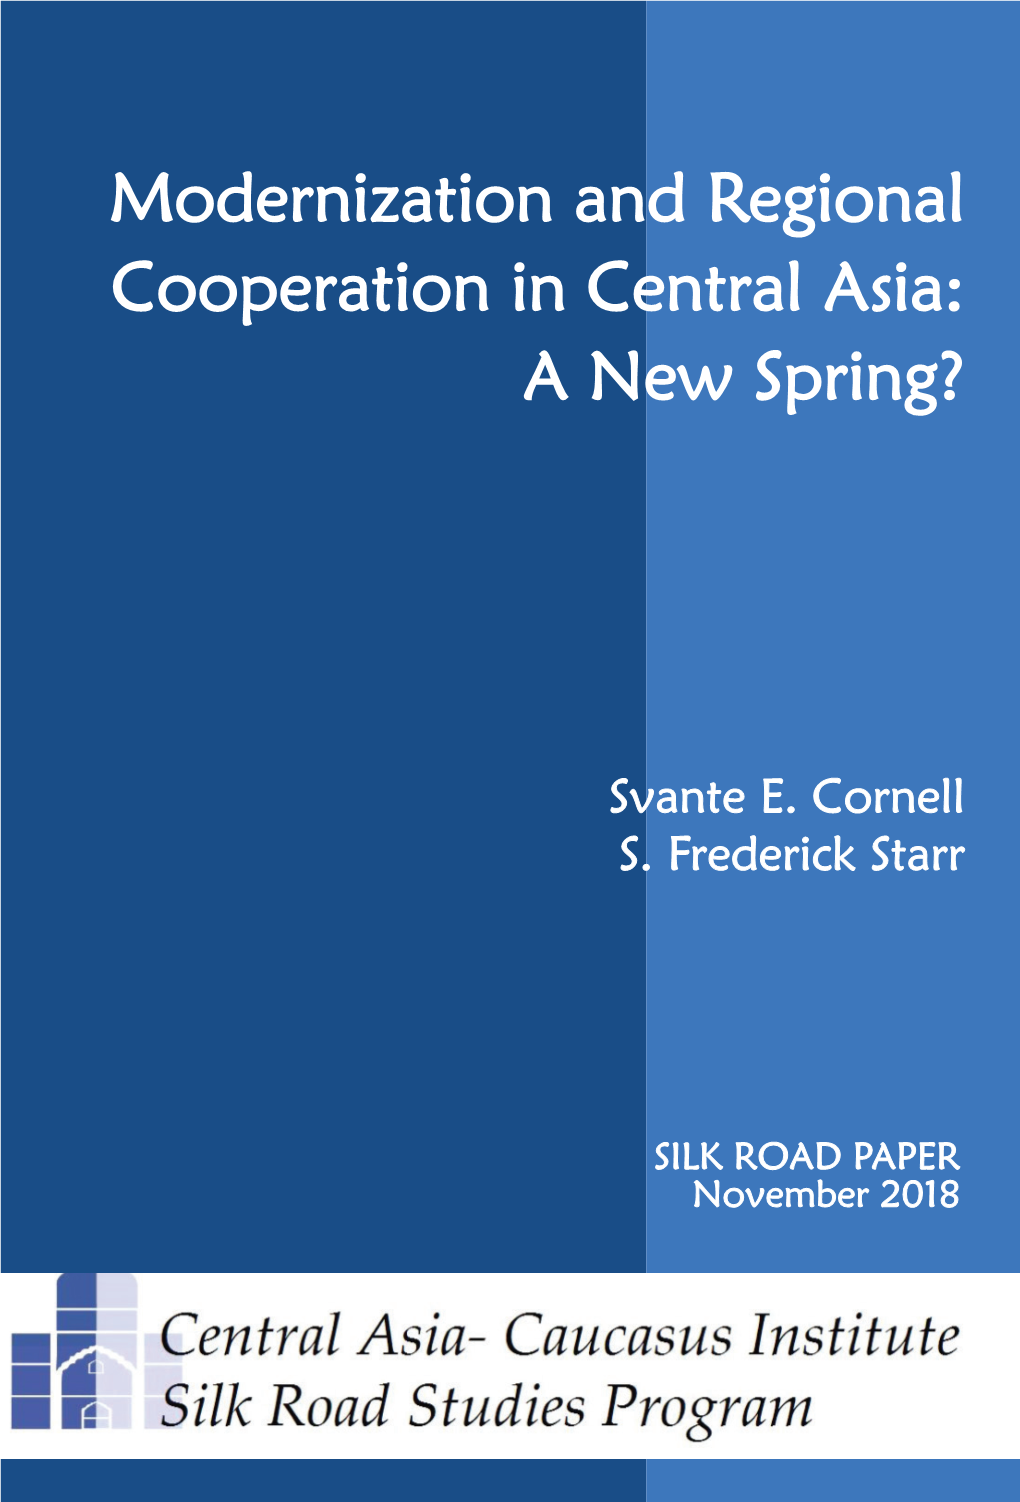 Modernization and Regional Cooperation in Central Asia: a New Spring?